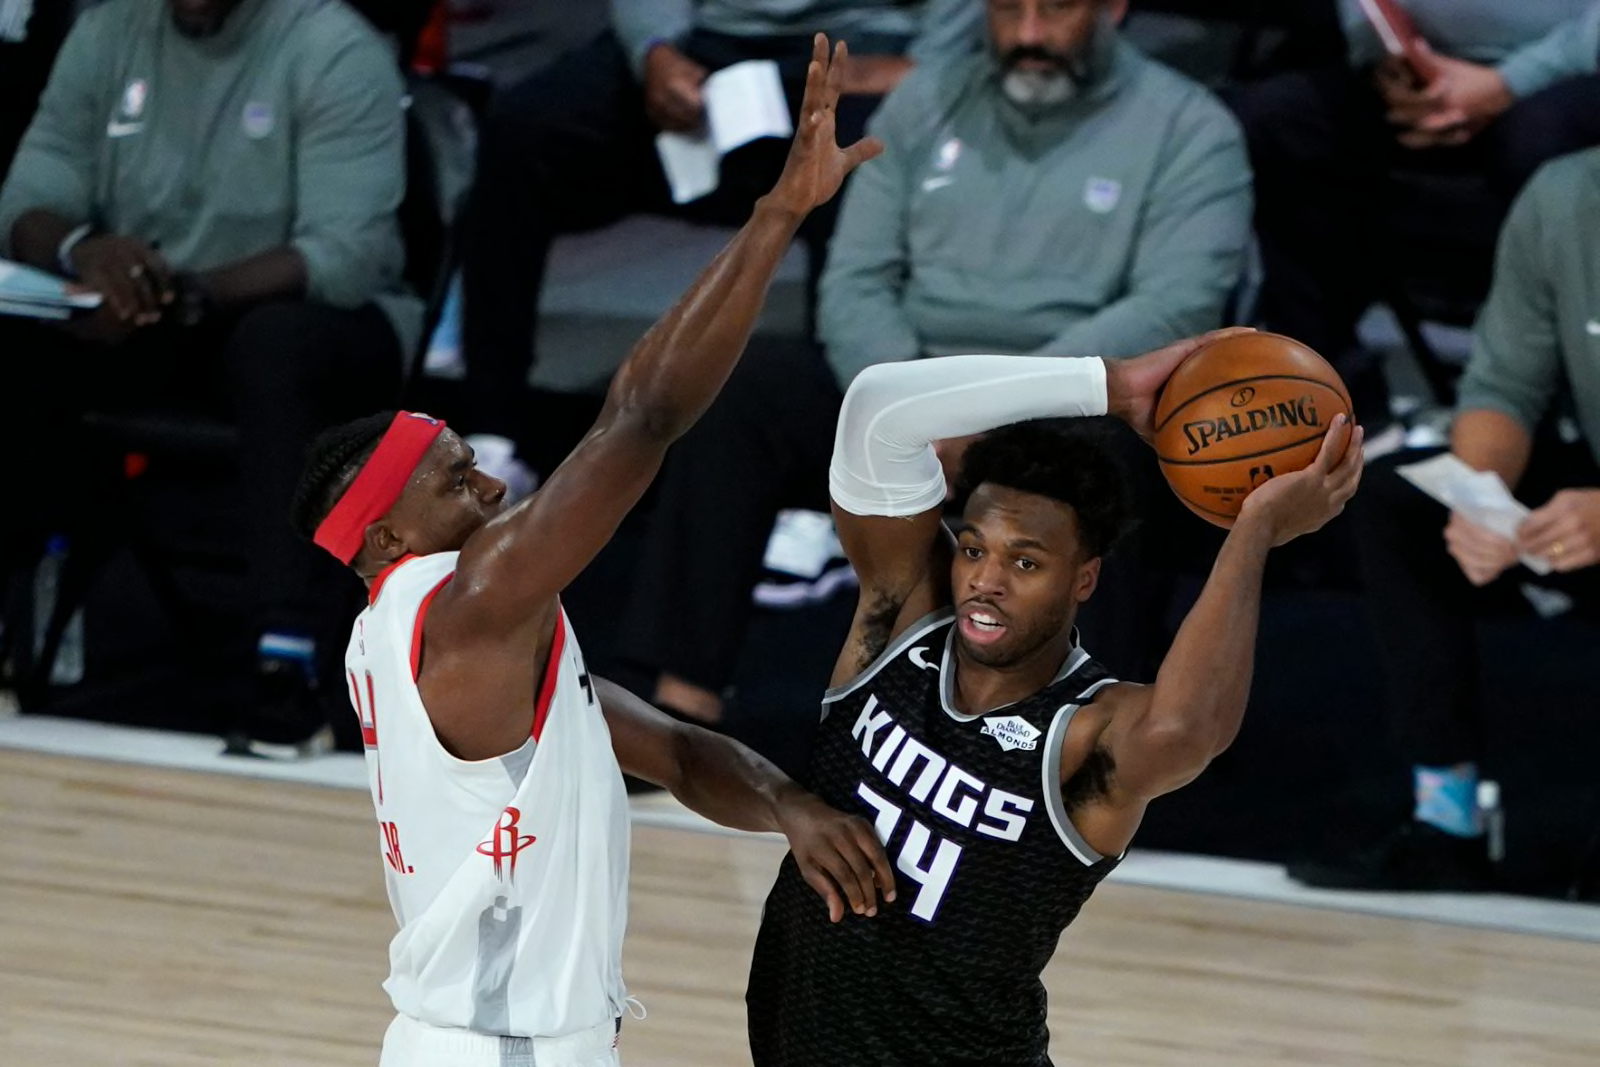 Near-trade to Lakers in offseason not weighing on Buddy Hield's mind